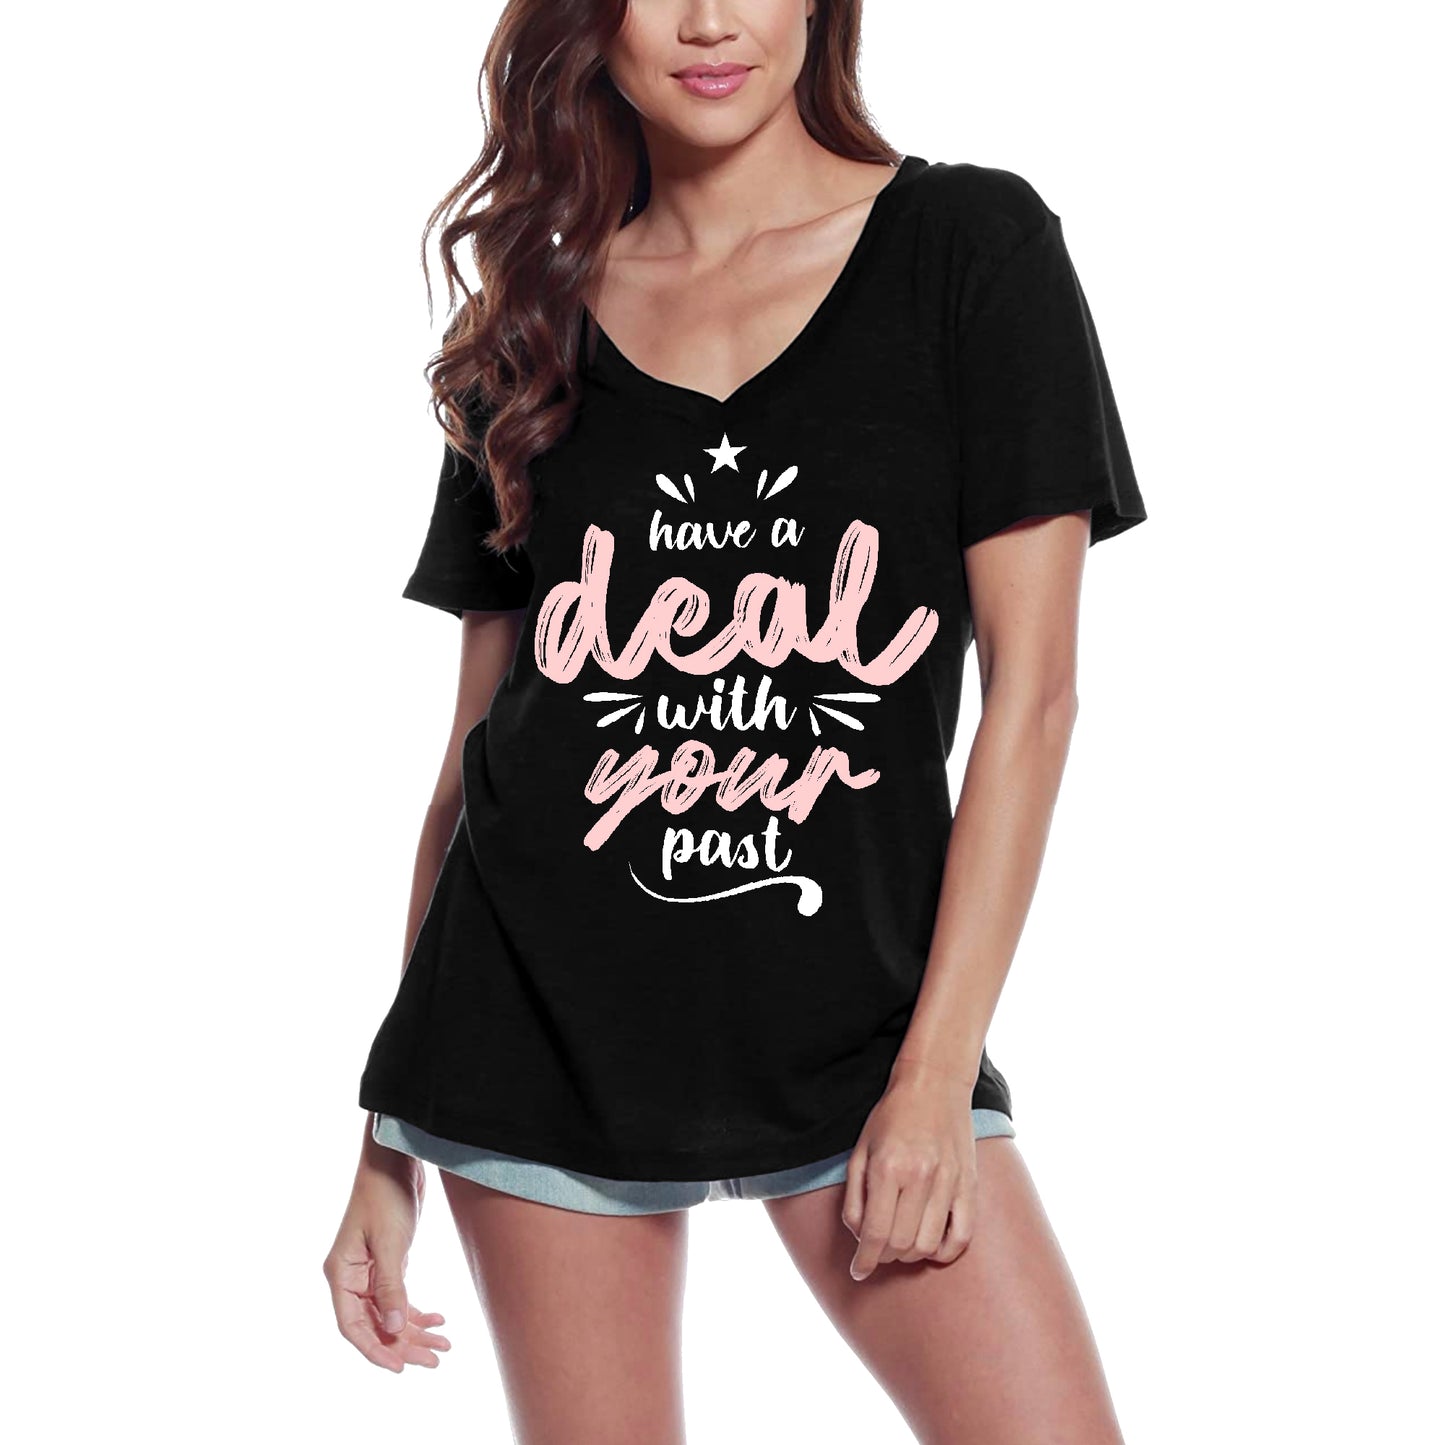 ULTRABASIC Women's T-Shirt Have a Deal With Your Past - Inspirational Quote